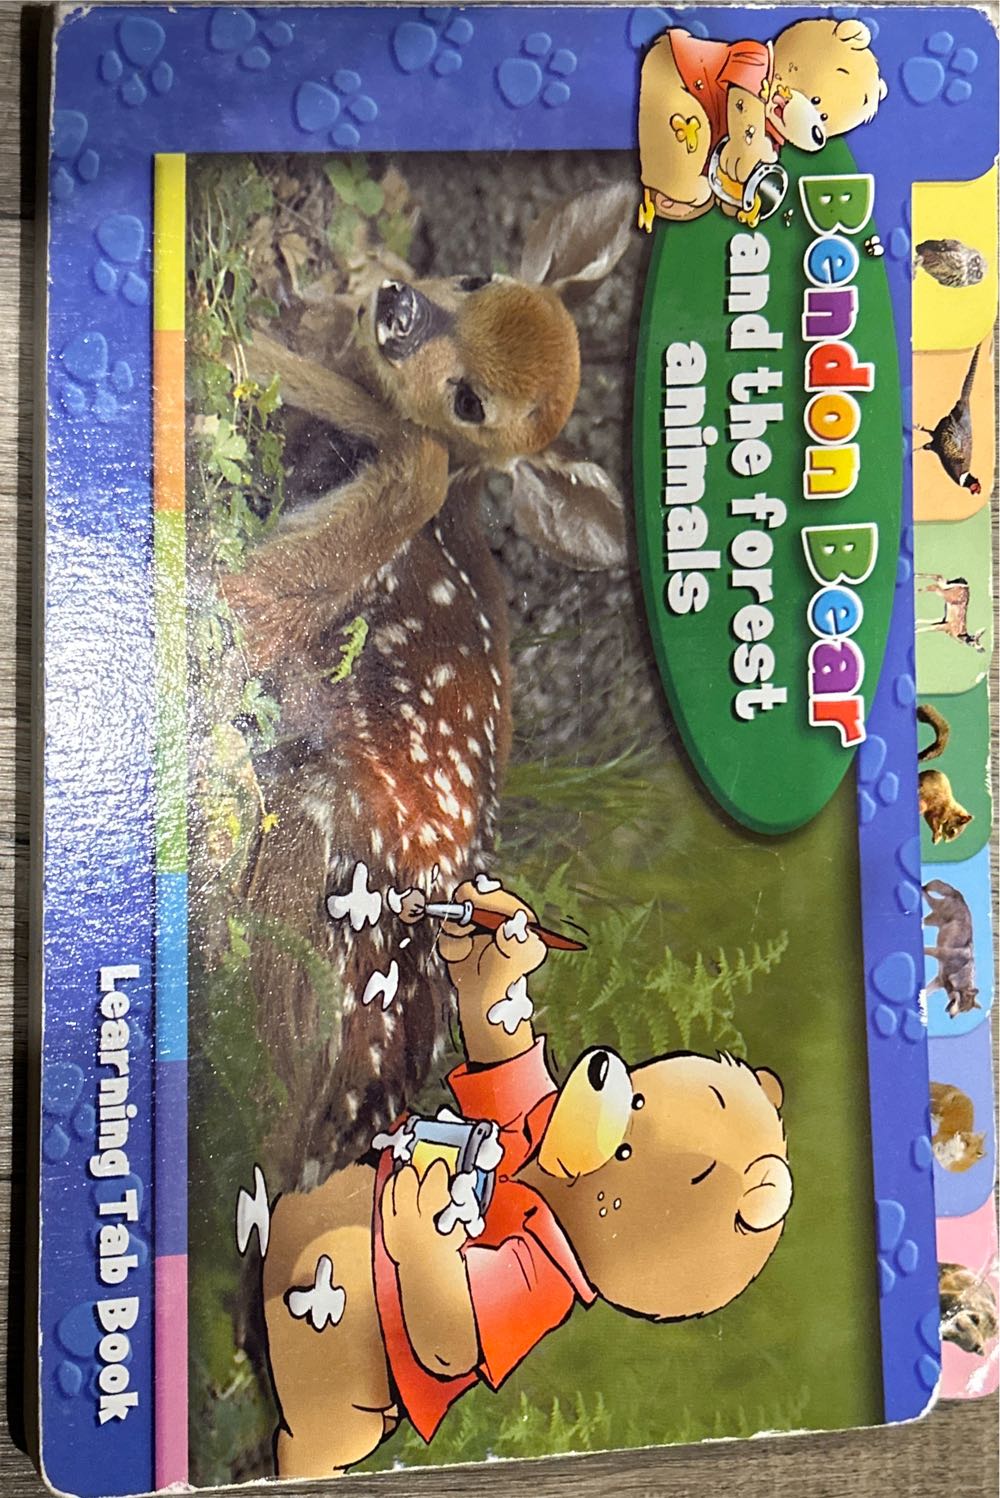 Bendon Bear And The Forest Animals - Bendon Publishing (Bendon Publishing - Hardcover) book collectible [Barcode 9781932209327] - Main Image 2